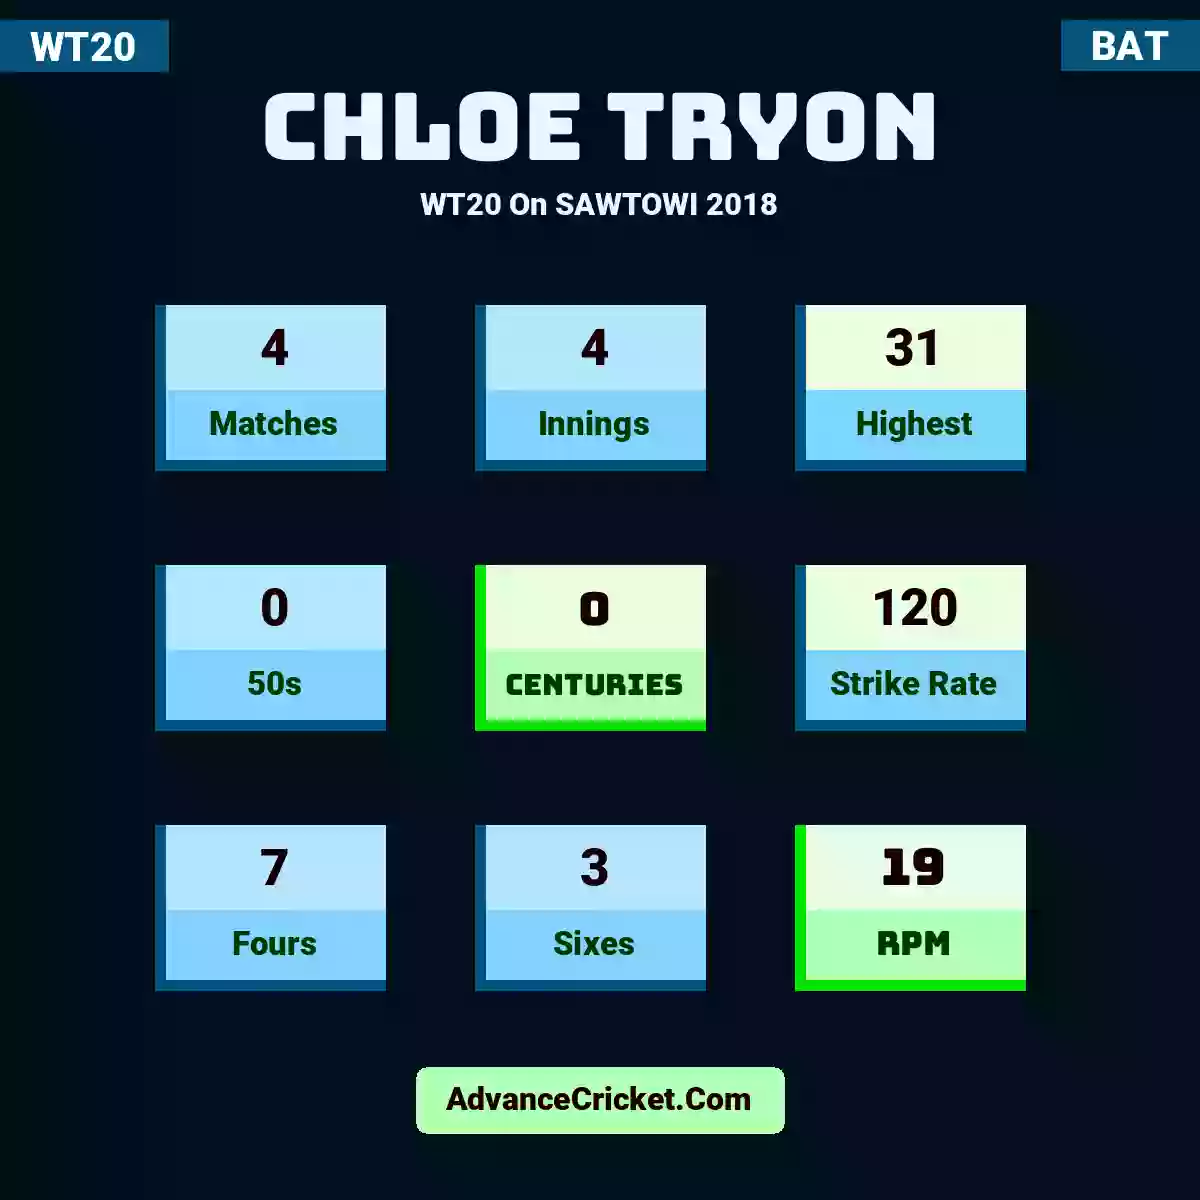 Chloe Tryon WT20  On SAWTOWI 2018, Chloe Tryon played 4 matches, scored 31 runs as highest, 0 half-centuries, and 0 centuries, with a strike rate of 120. C.Tryon hit 7 fours and 3 sixes, with an RPM of 19.